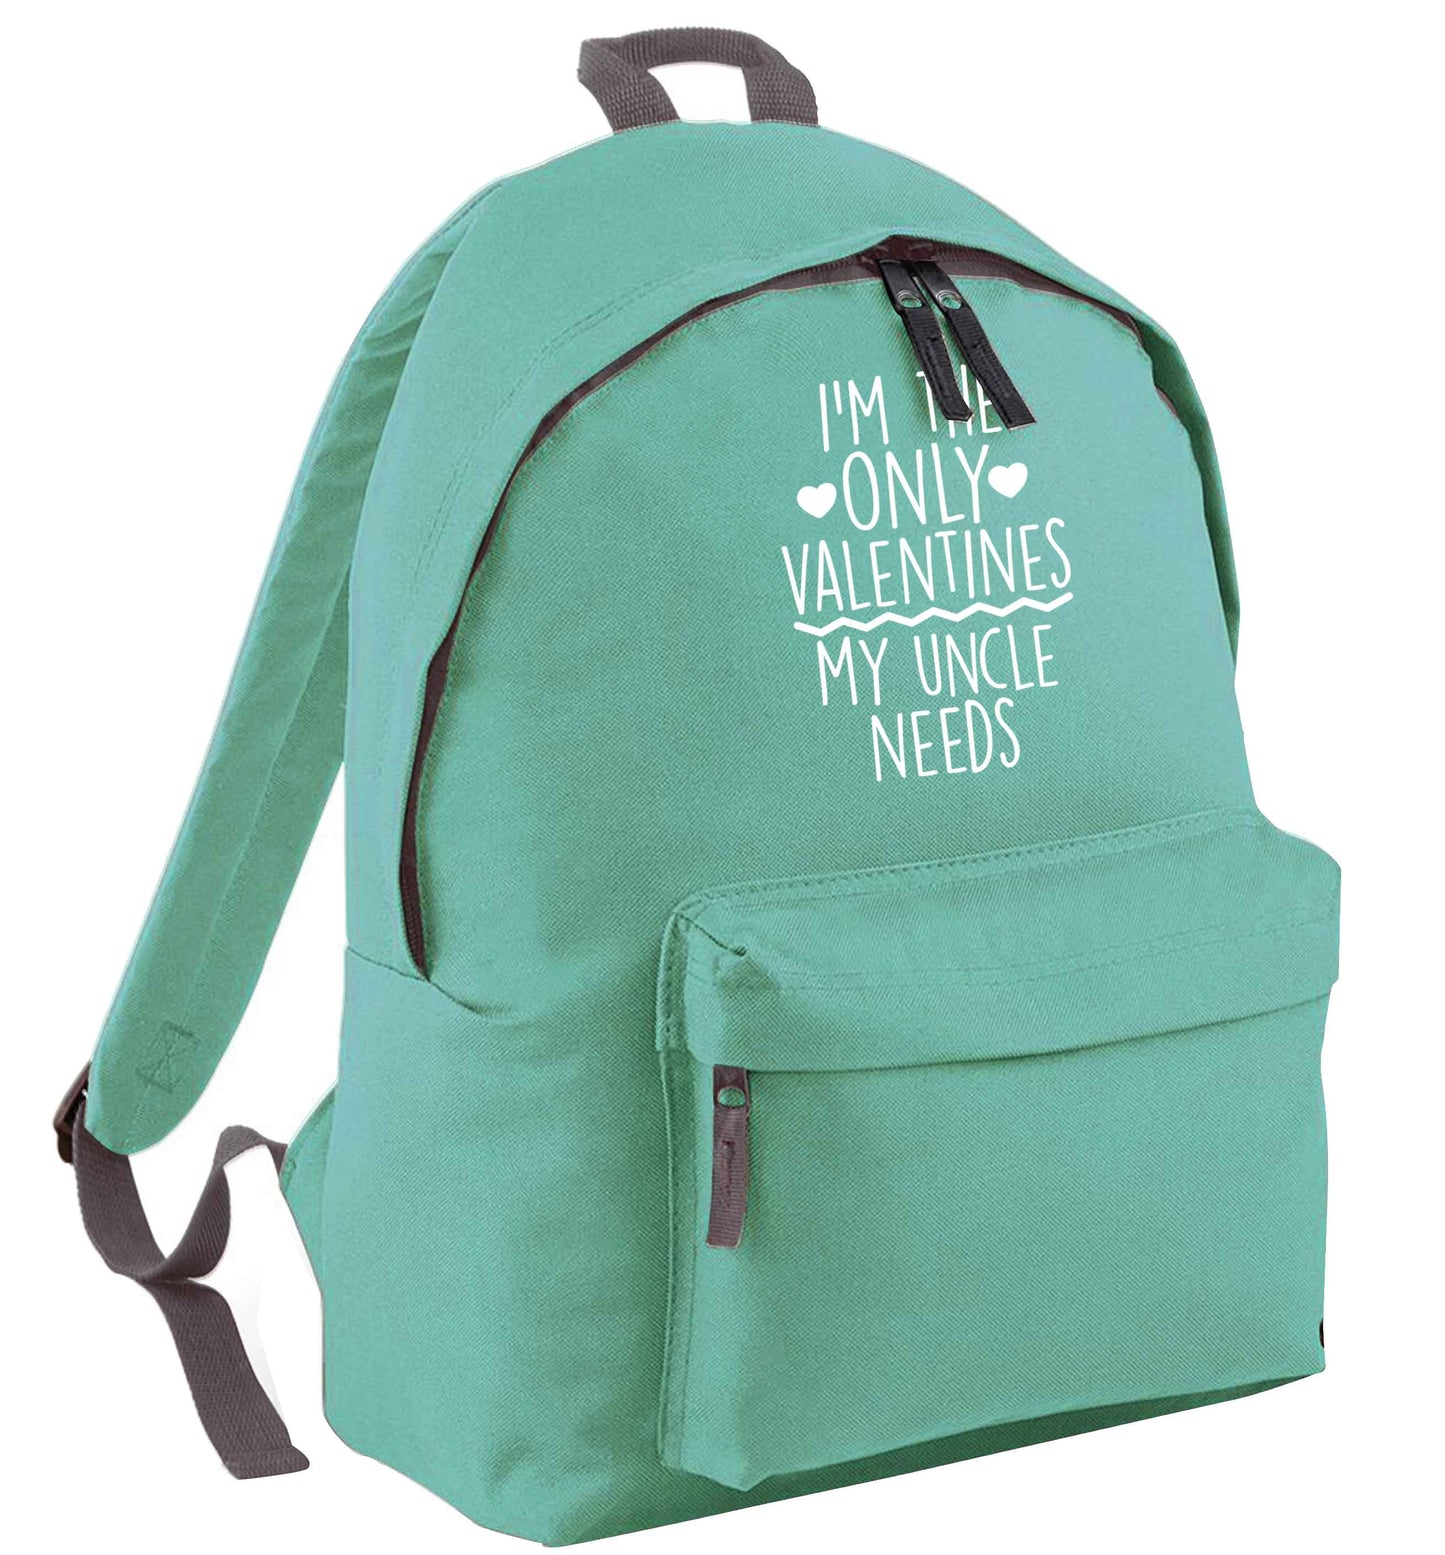 I'm the only valentines my uncle needs mint adults backpack